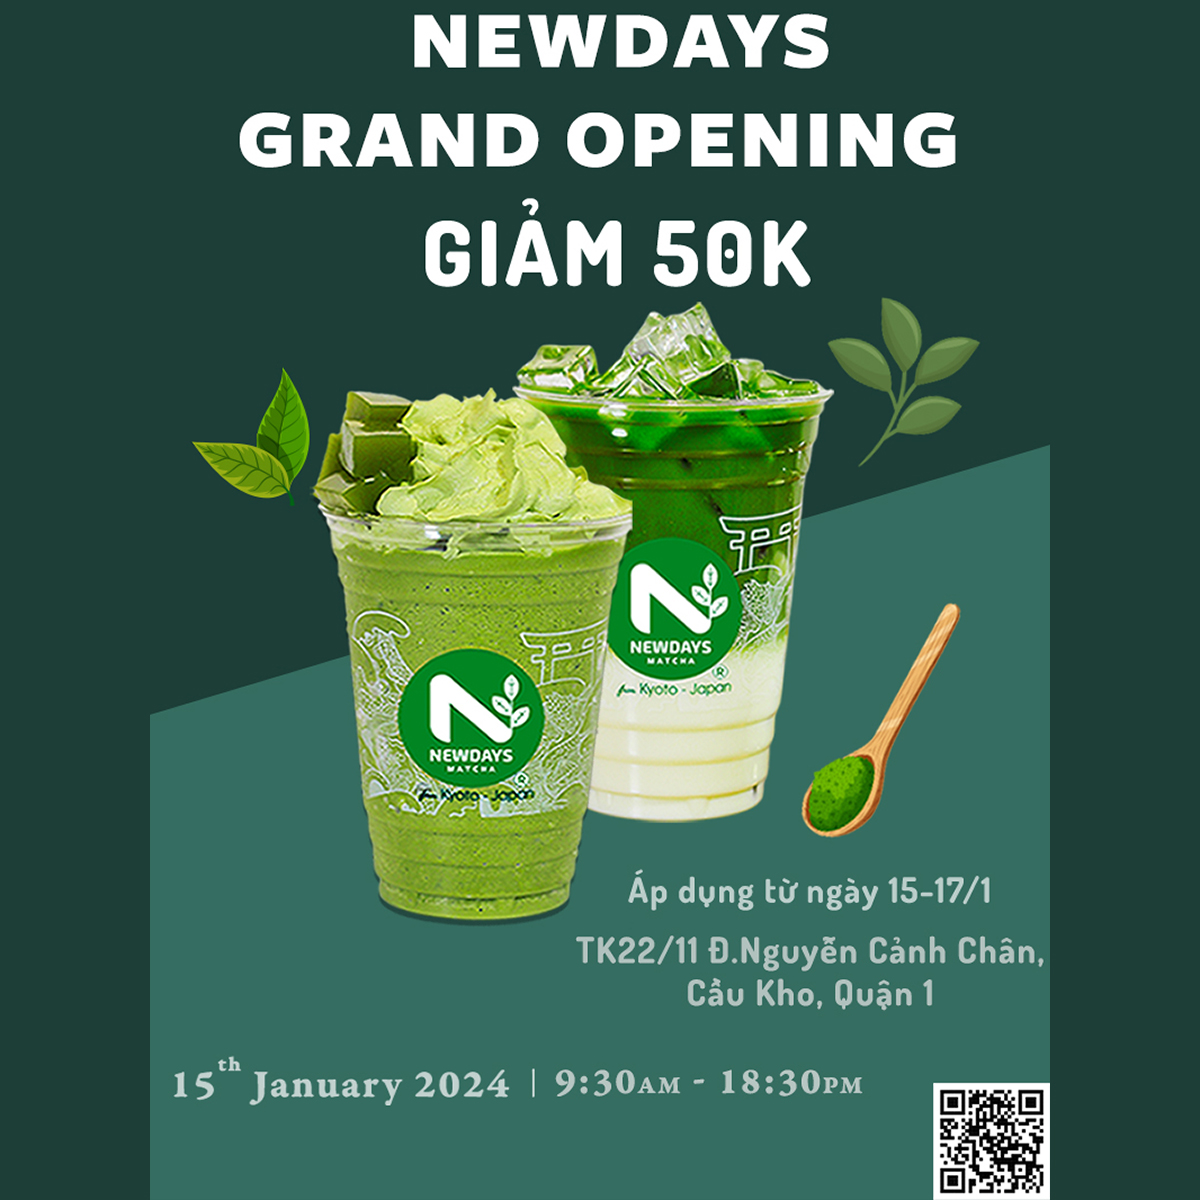 Newdays Nguyen Canh Chan Grand opening